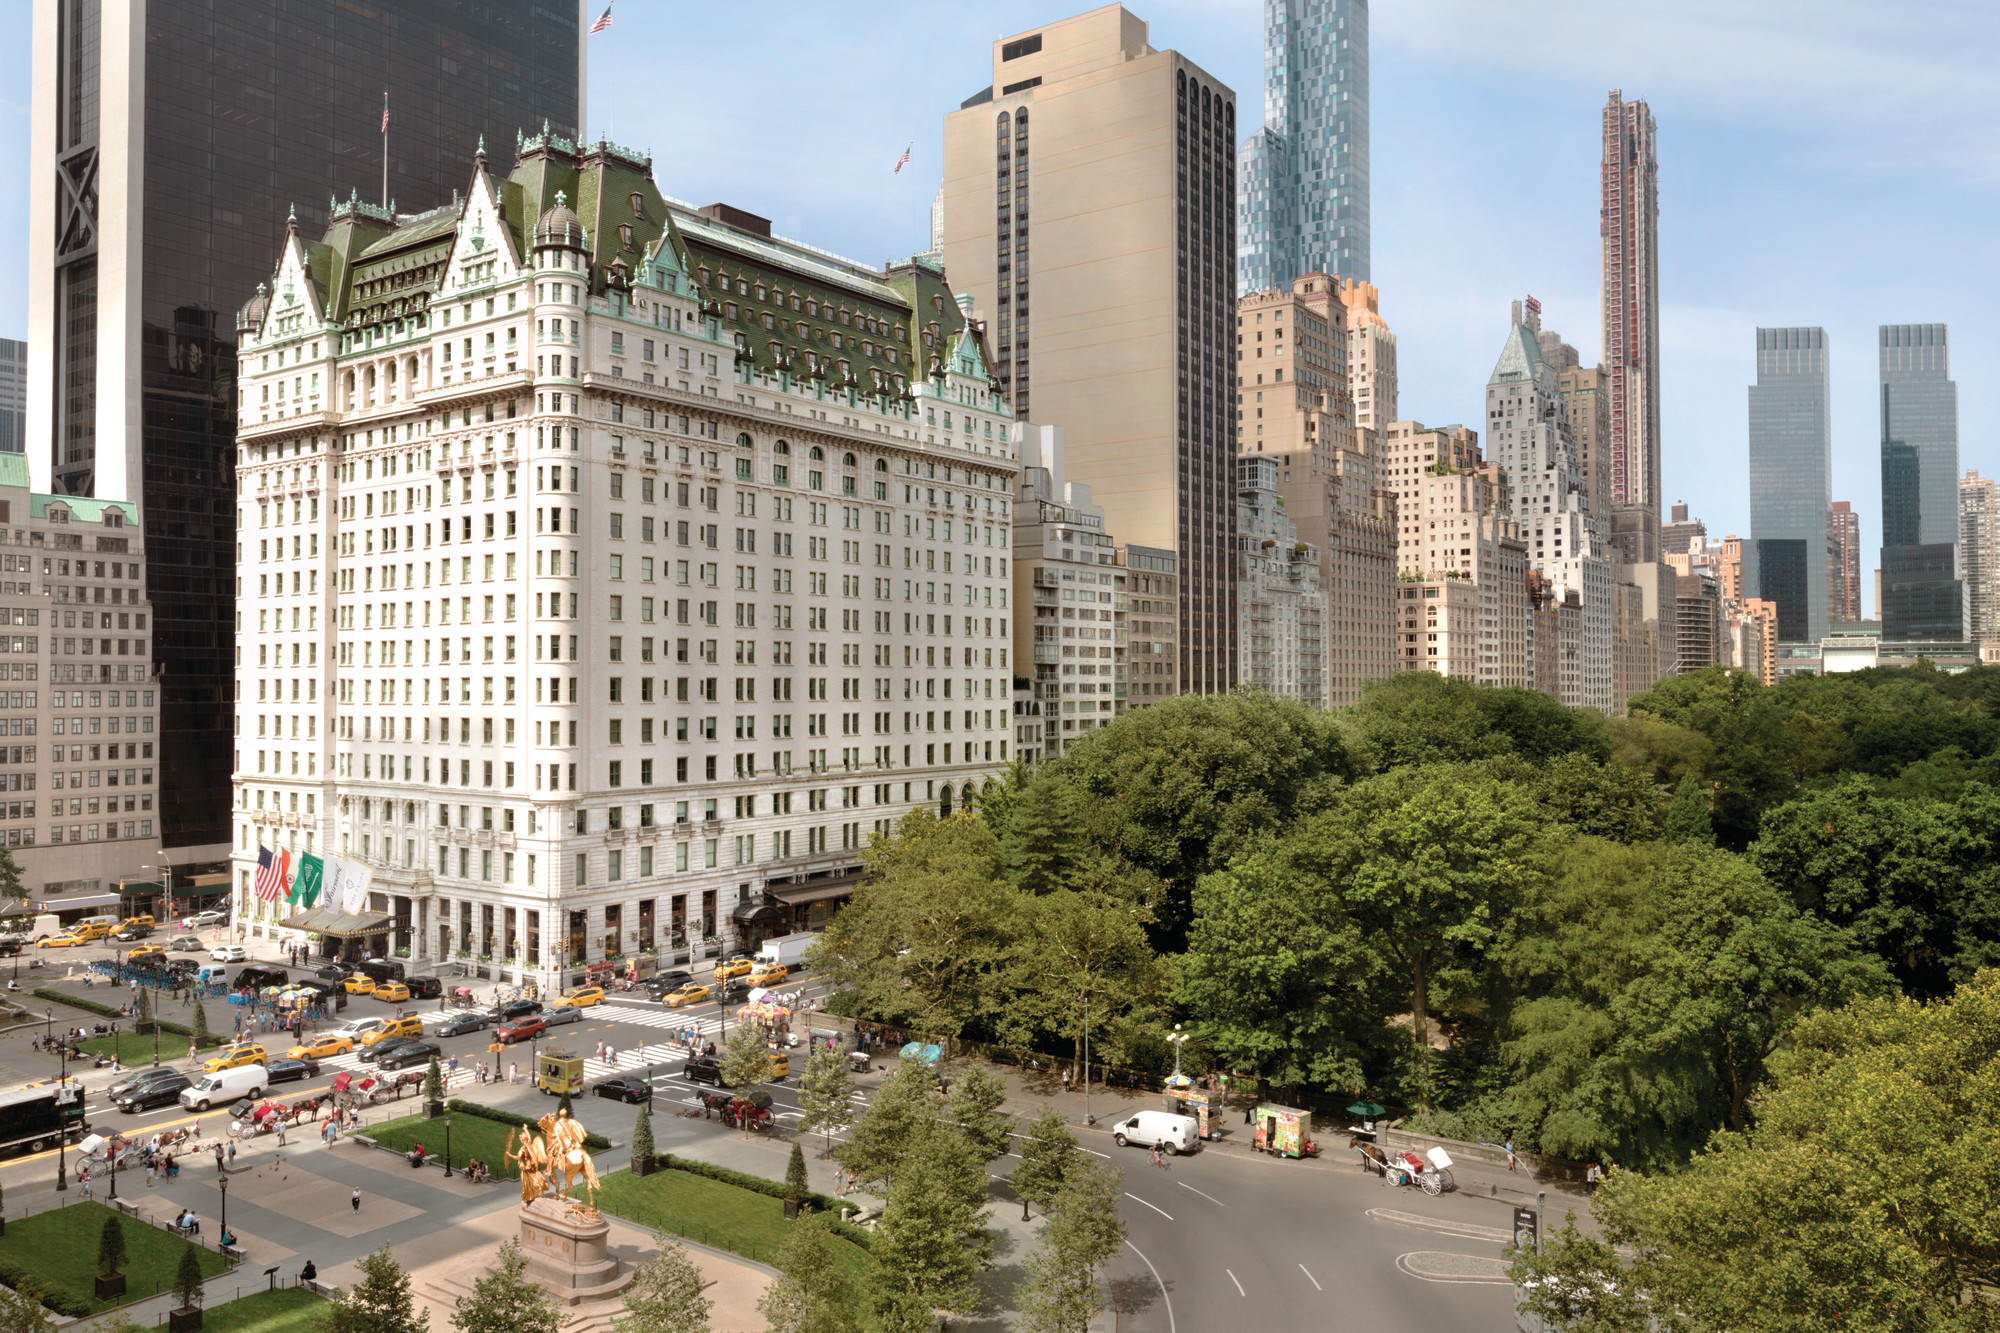 The Hotel at Fifth Avenue New York